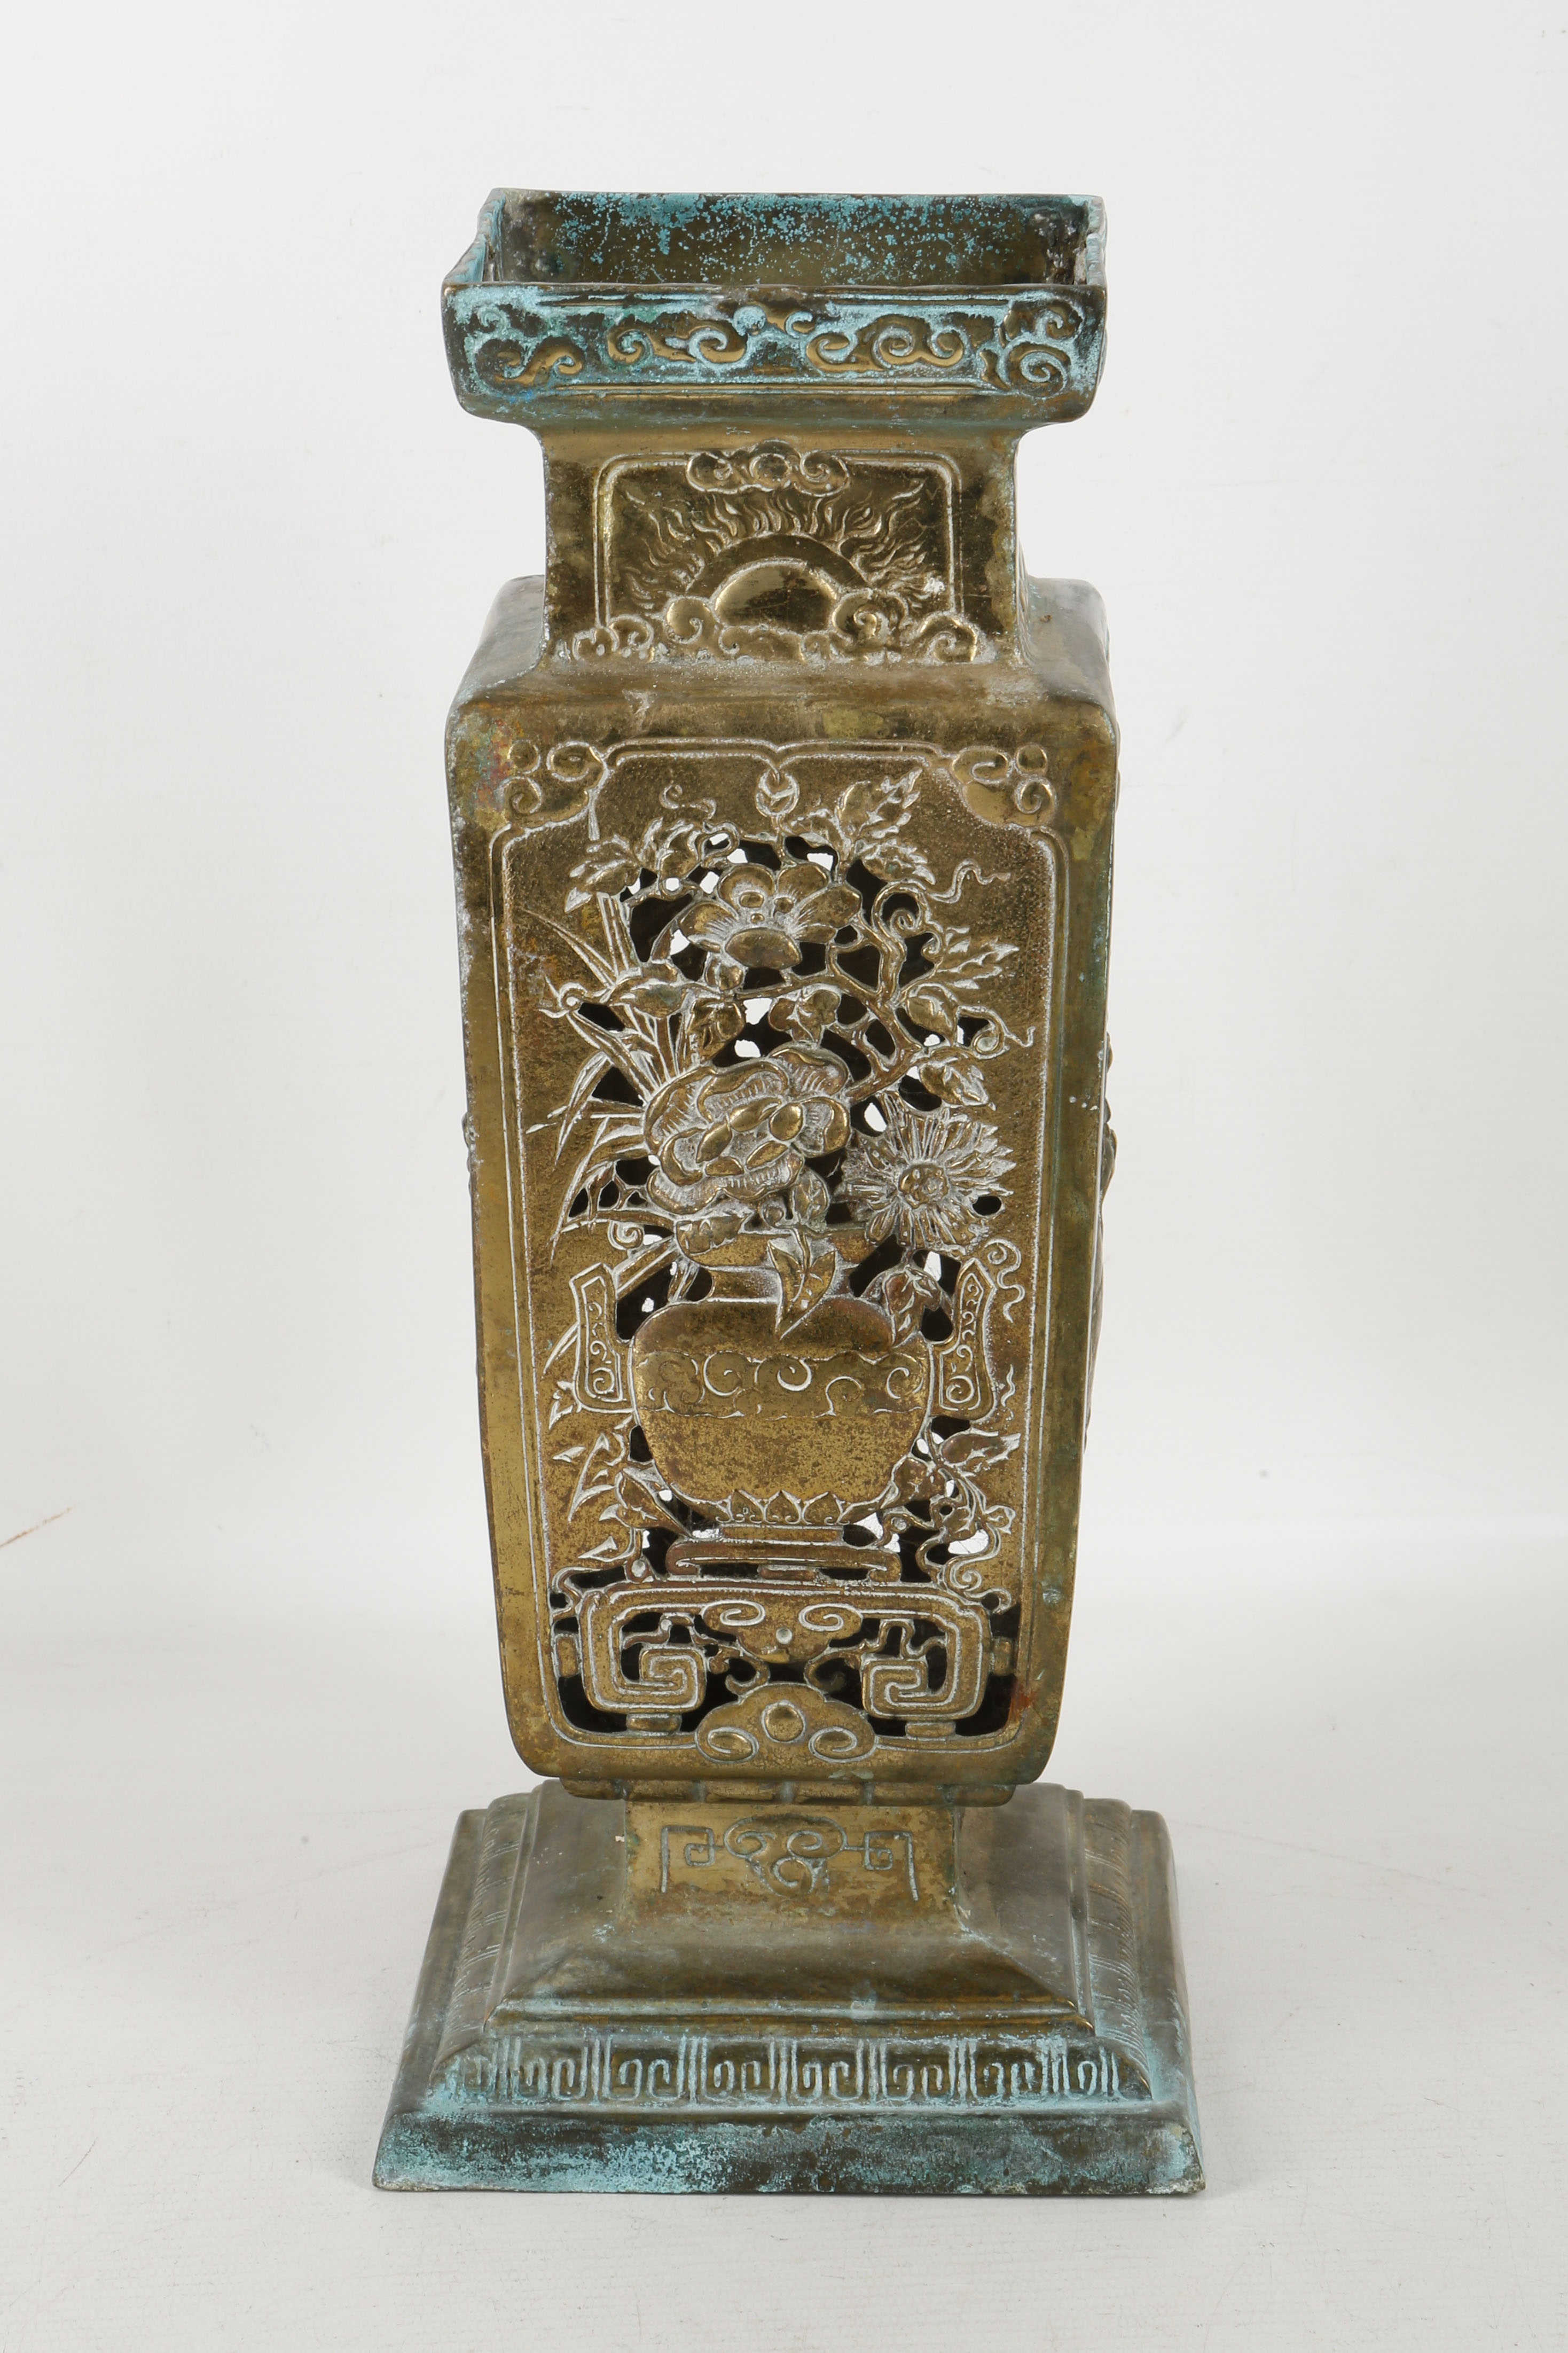 A Chinese copper alloy square section reticulated lantern, the sides decorated with vases filled